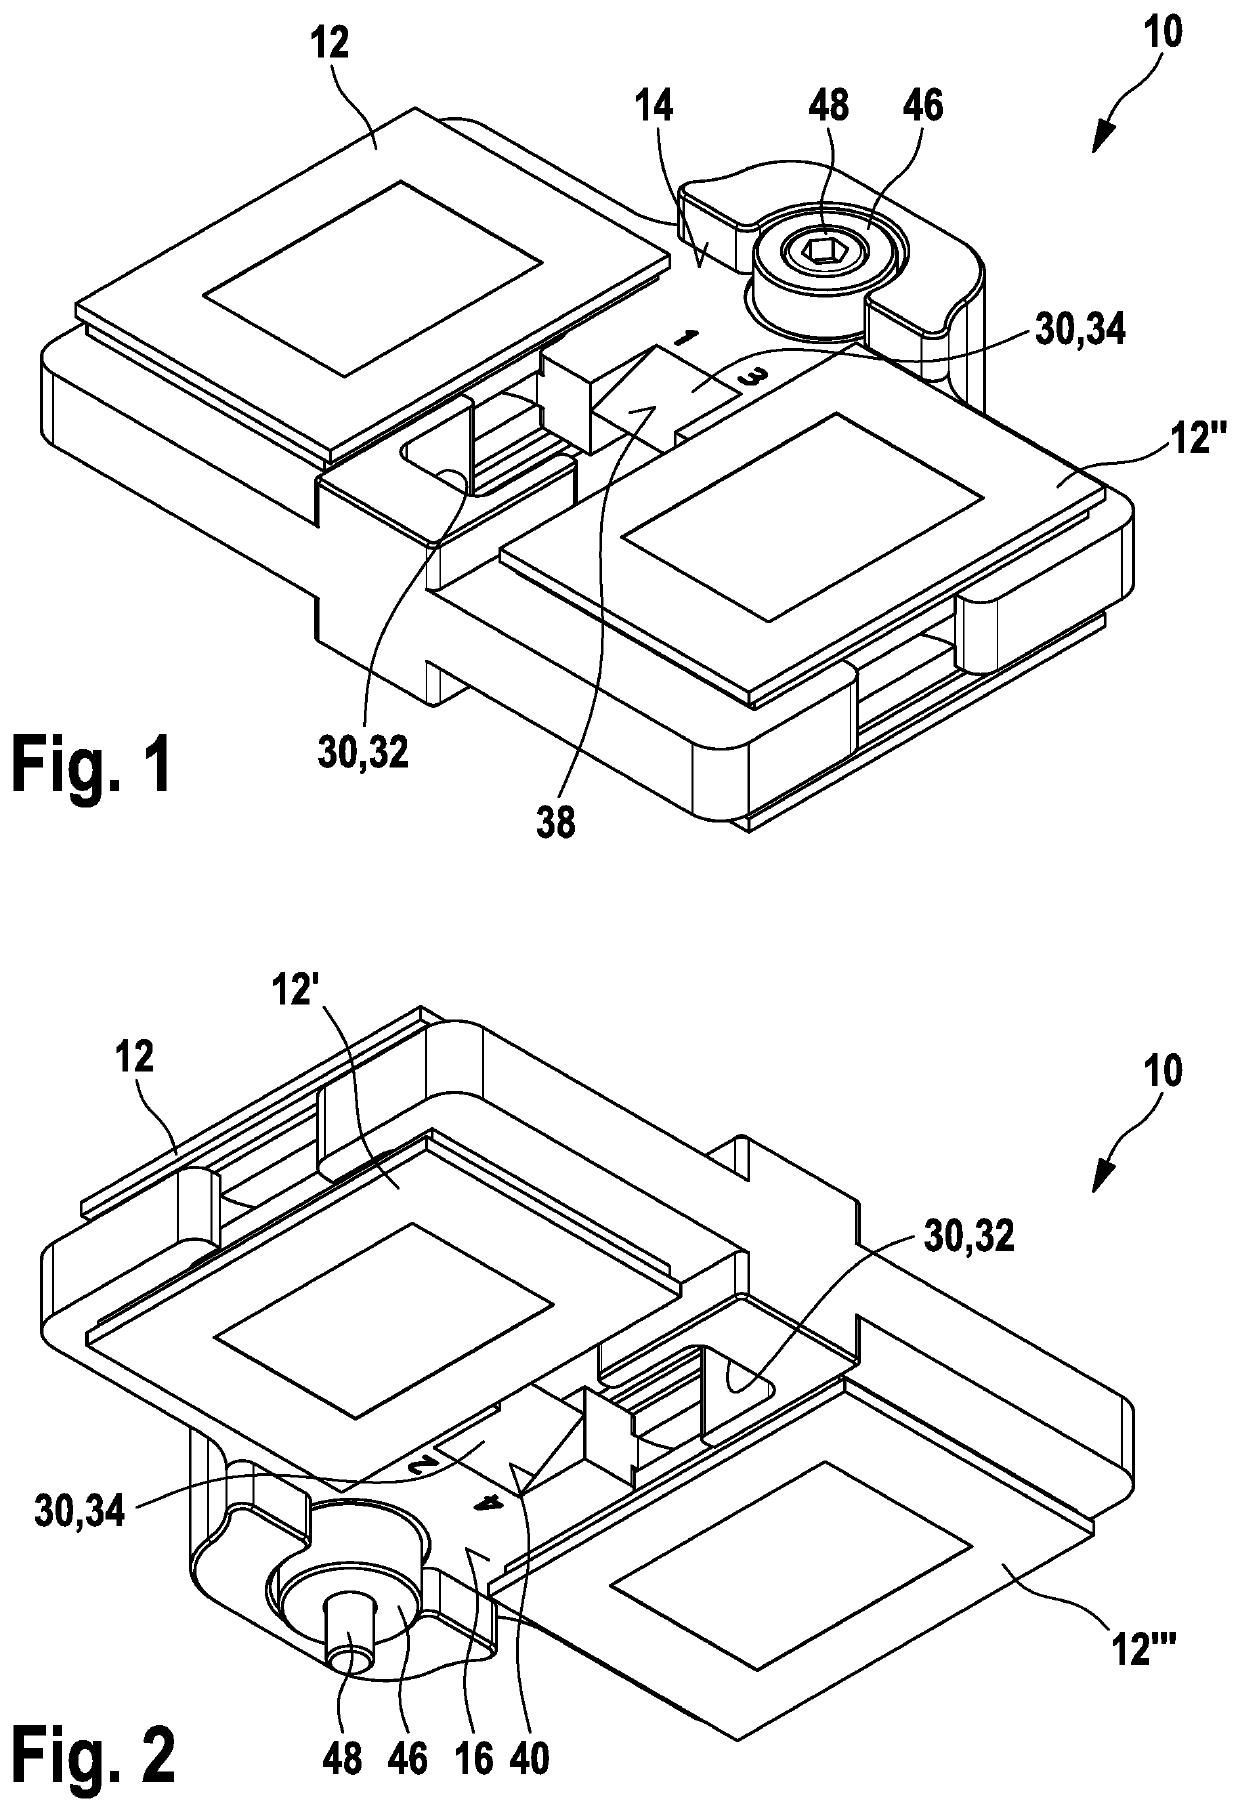 Holder for a plurality of reference standards for calibrating a measurement system